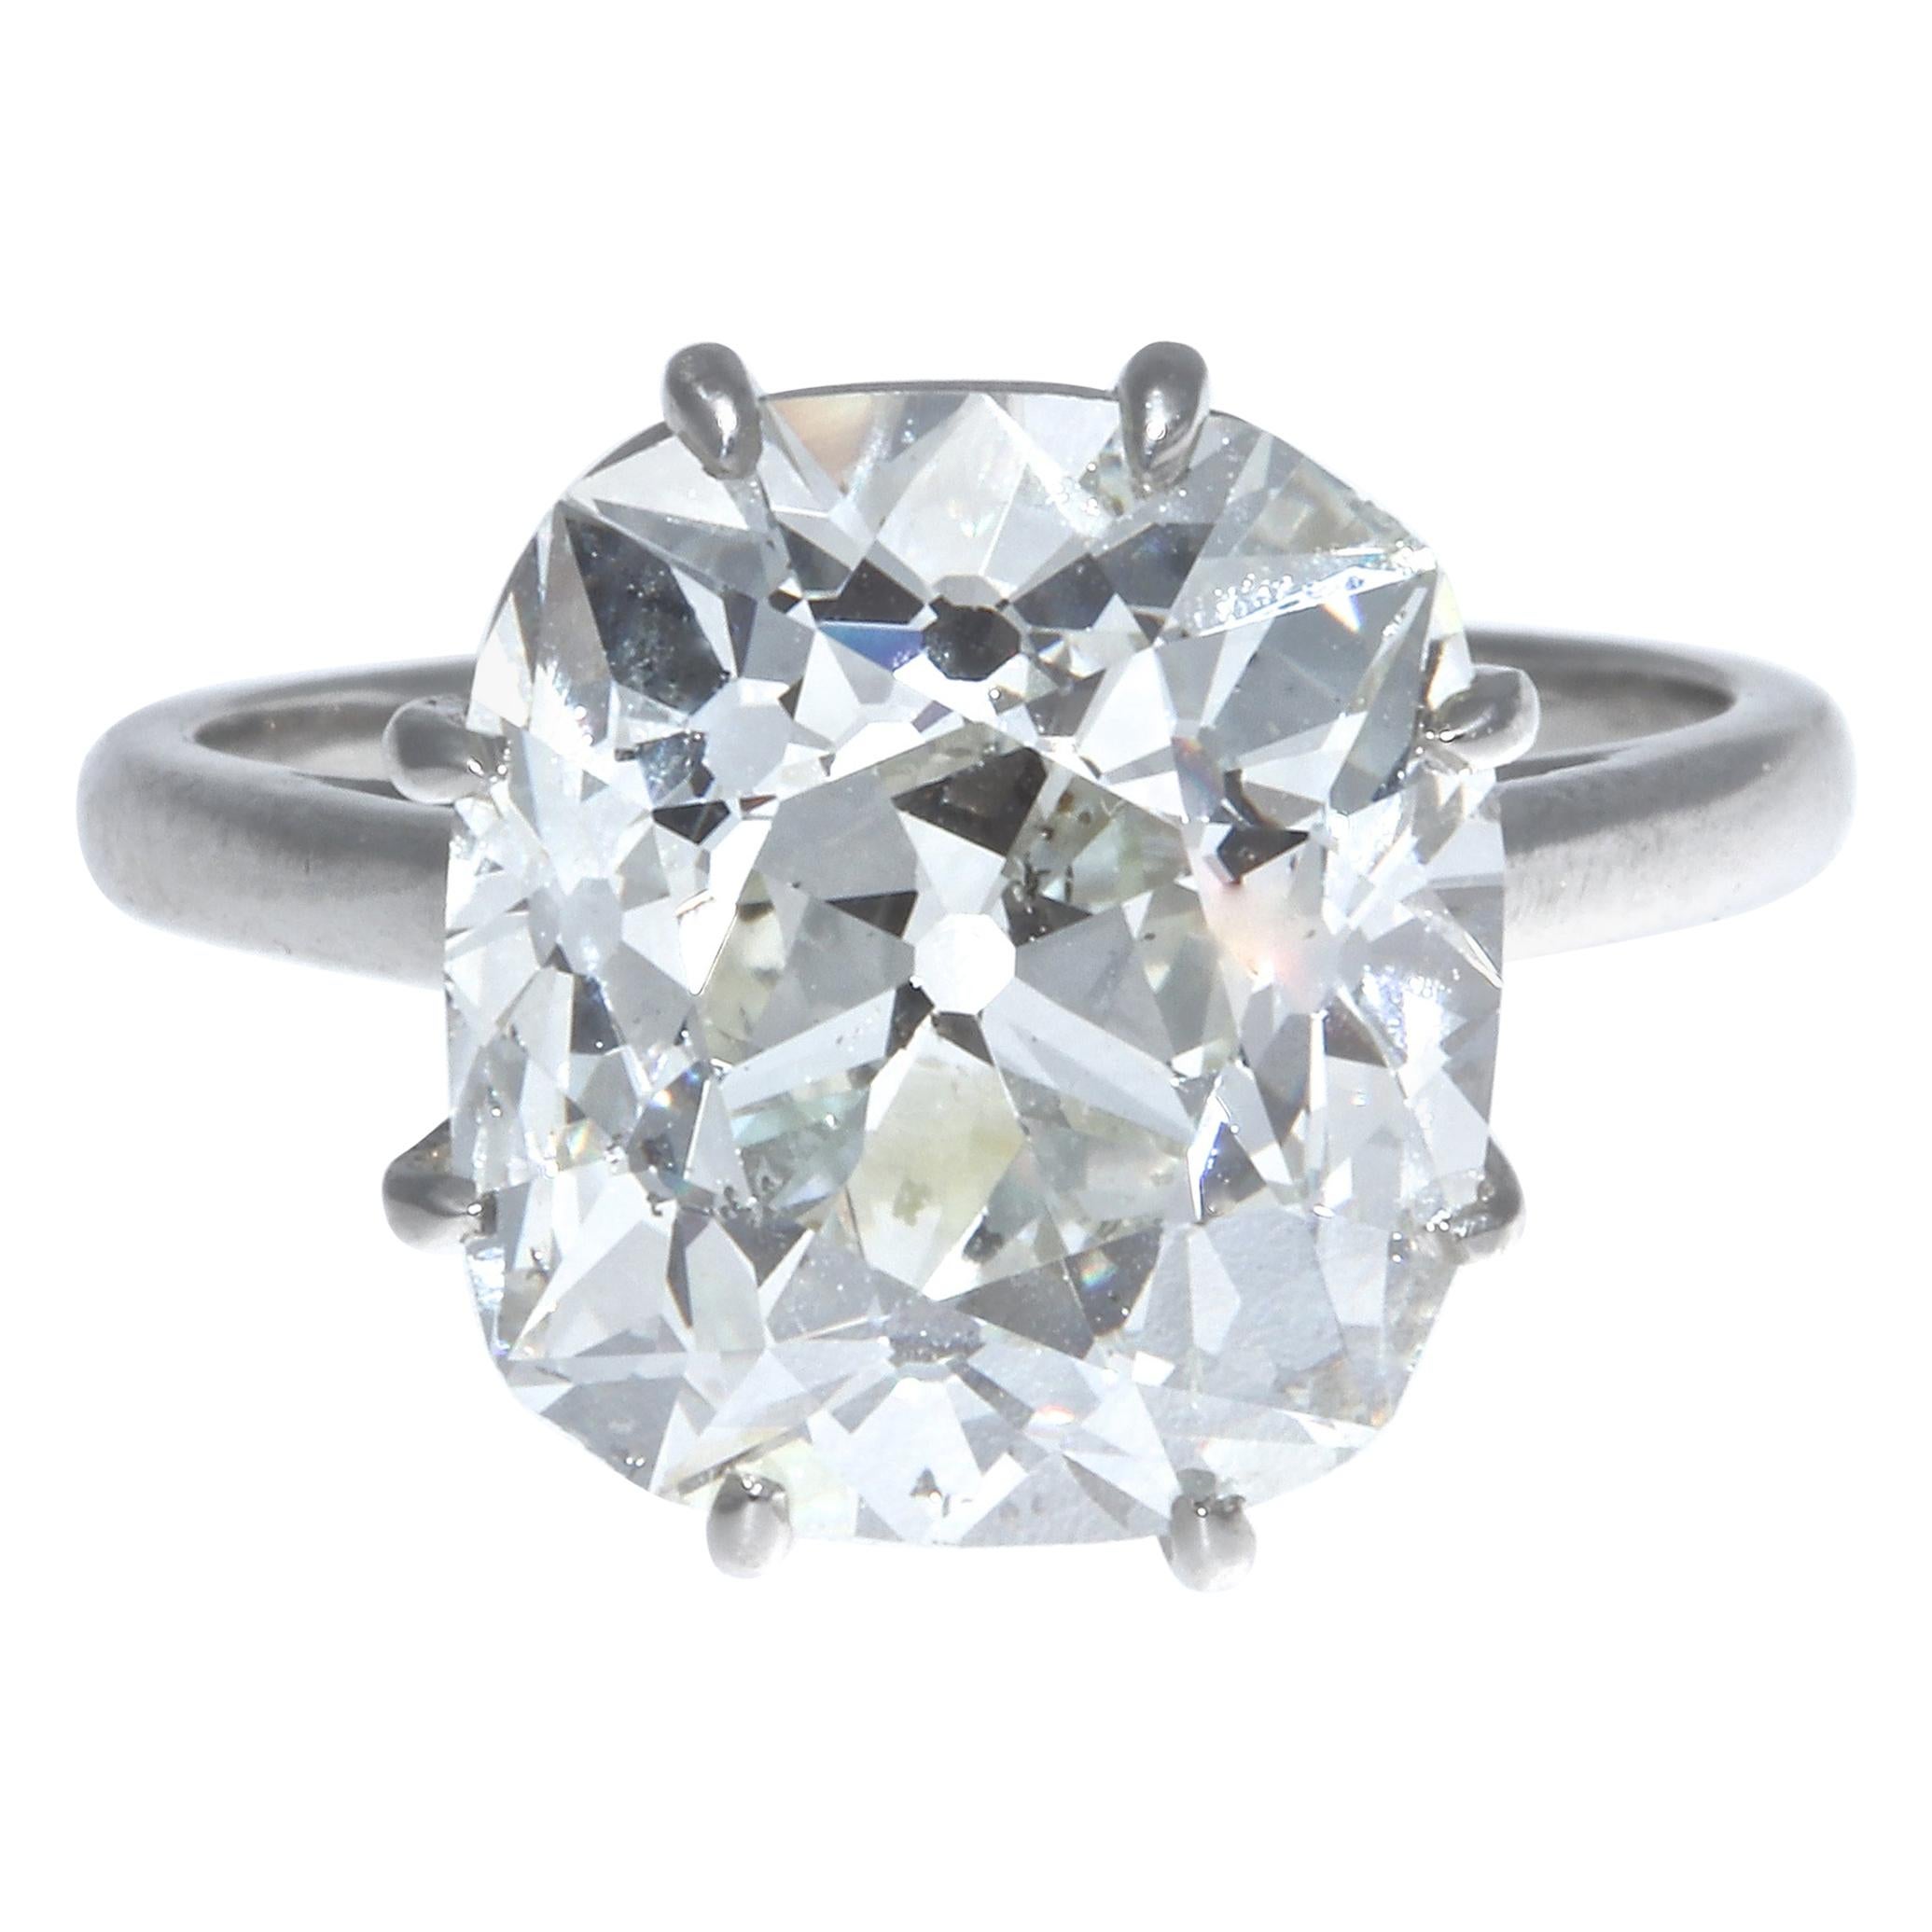 Simply put, this is The Perfect engagement ring. An incredibly fiery and brilliant 6.33 carat GIA certified old mine brilliant cut diamond steals hearts while providing more than ample finger coverage. This GIA certified old mine brilliant cut